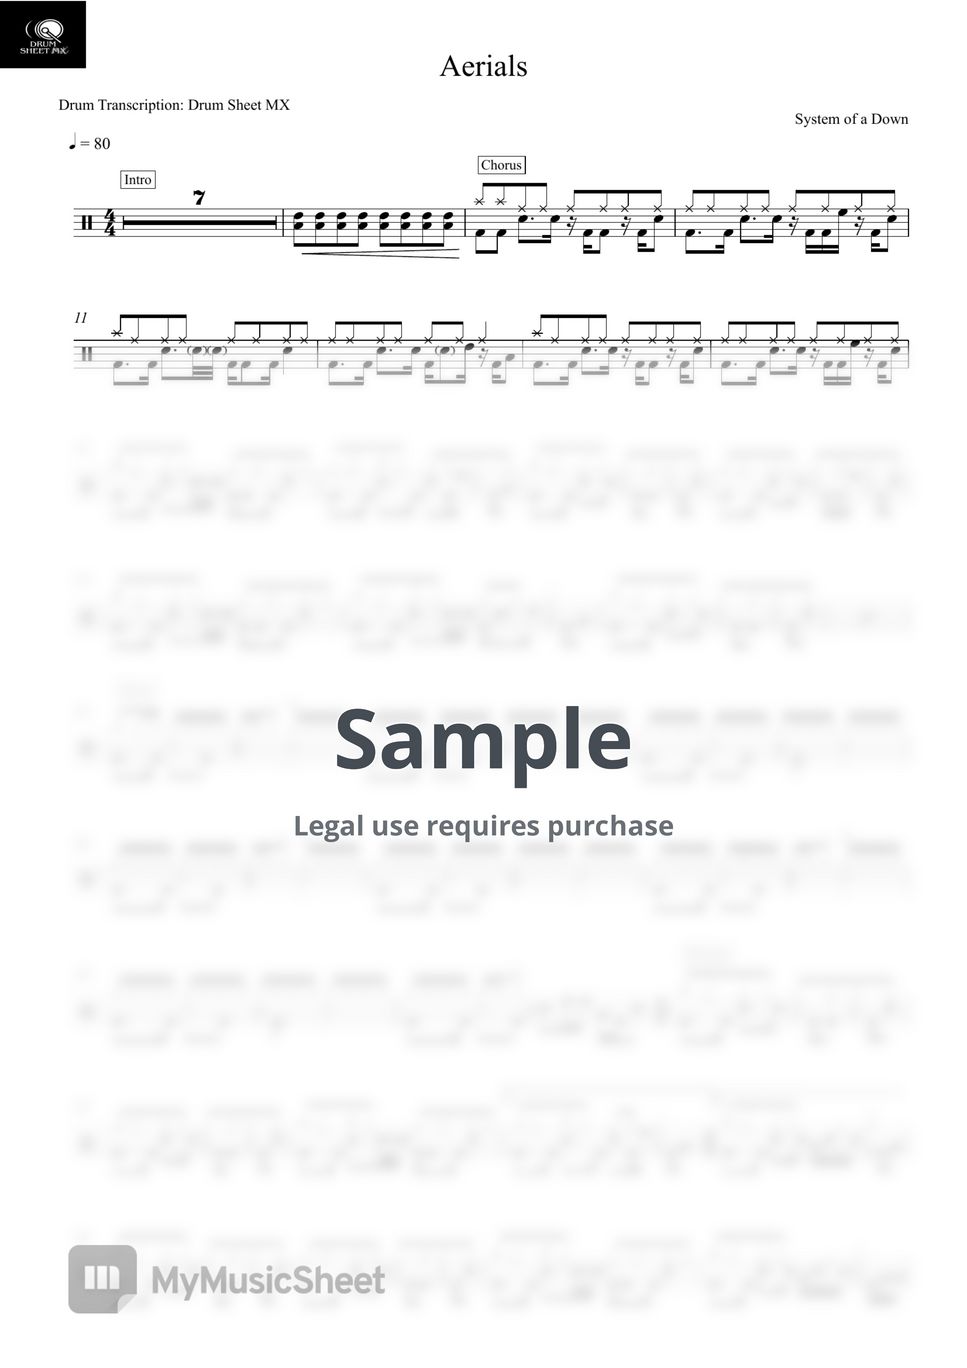 System of a Down - Aerials by Drum Transcription: Drum Sheet MX